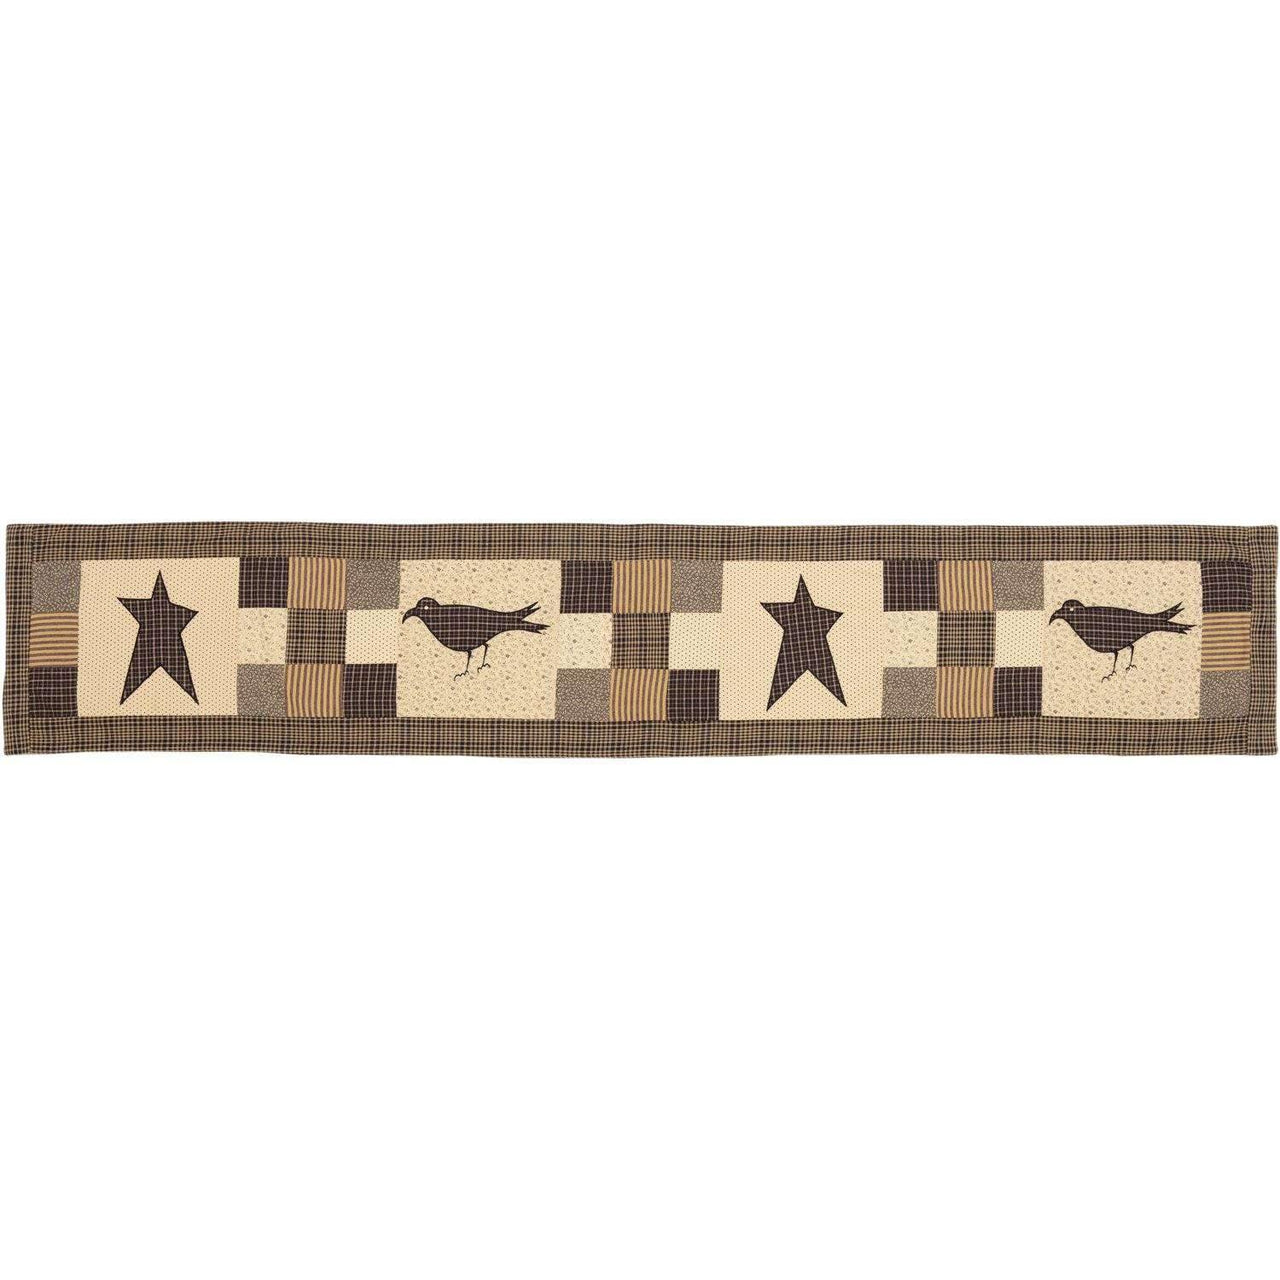 Kettle Grove Runner Crow and Star 13x72 VHC Brands - The Fox Decor